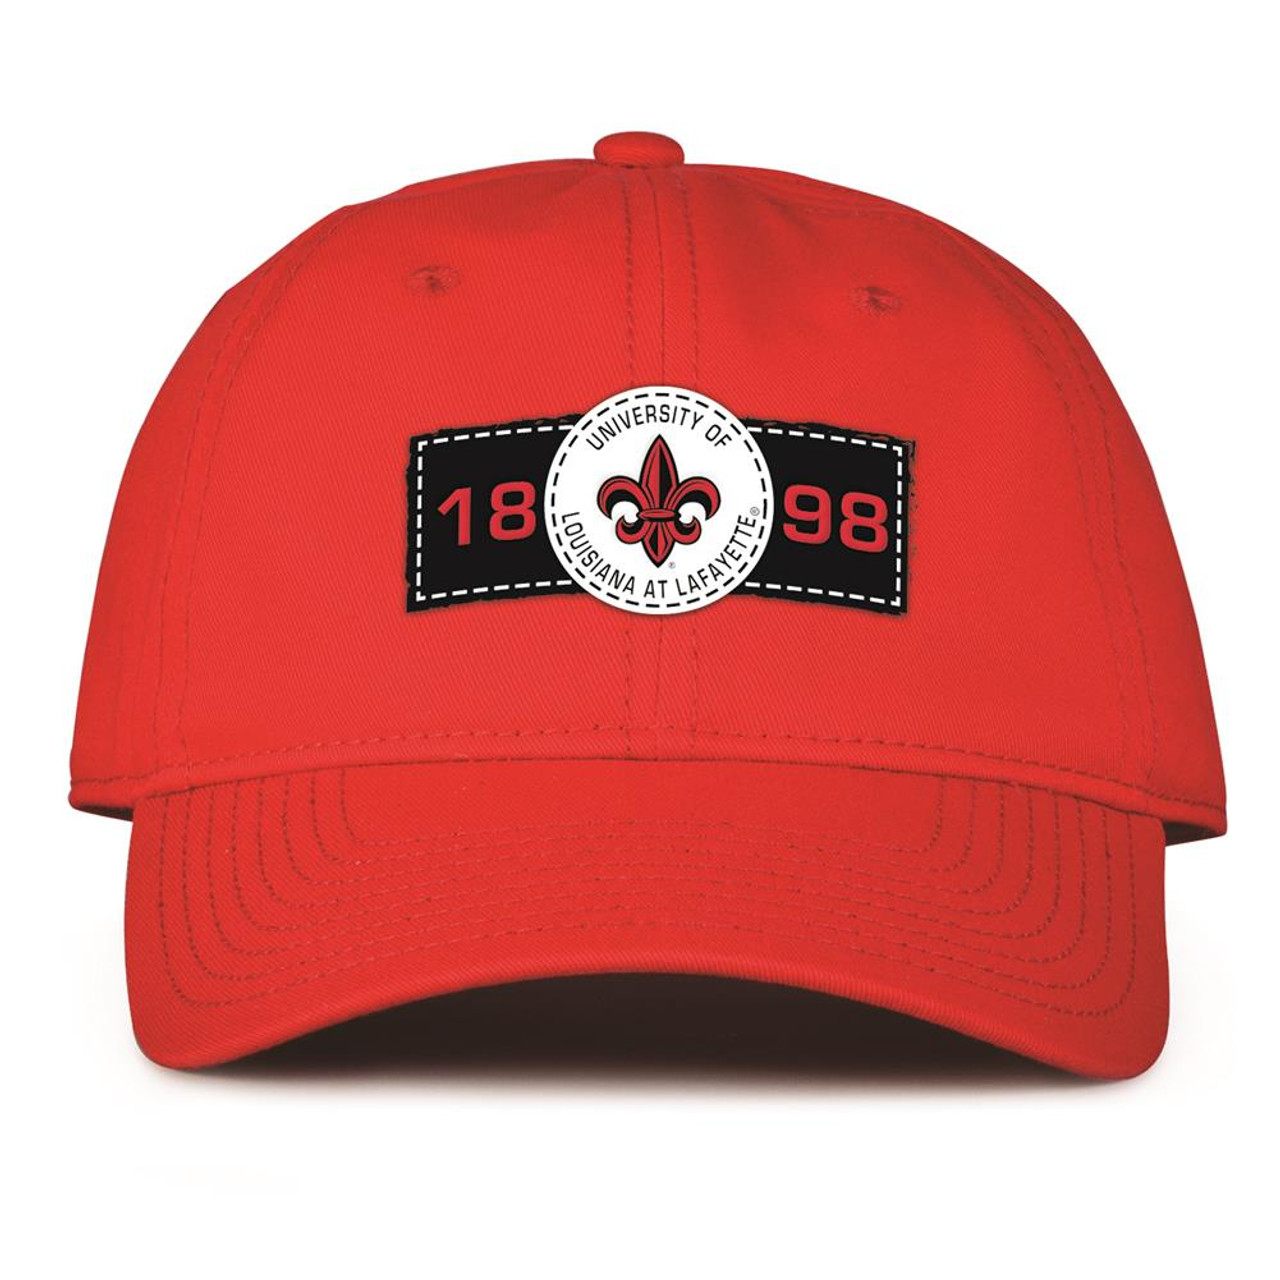 University of Louisville Cardinals Youth Trucker Cap | Legacy | One Size | Black | Hat/Youth Adjustable